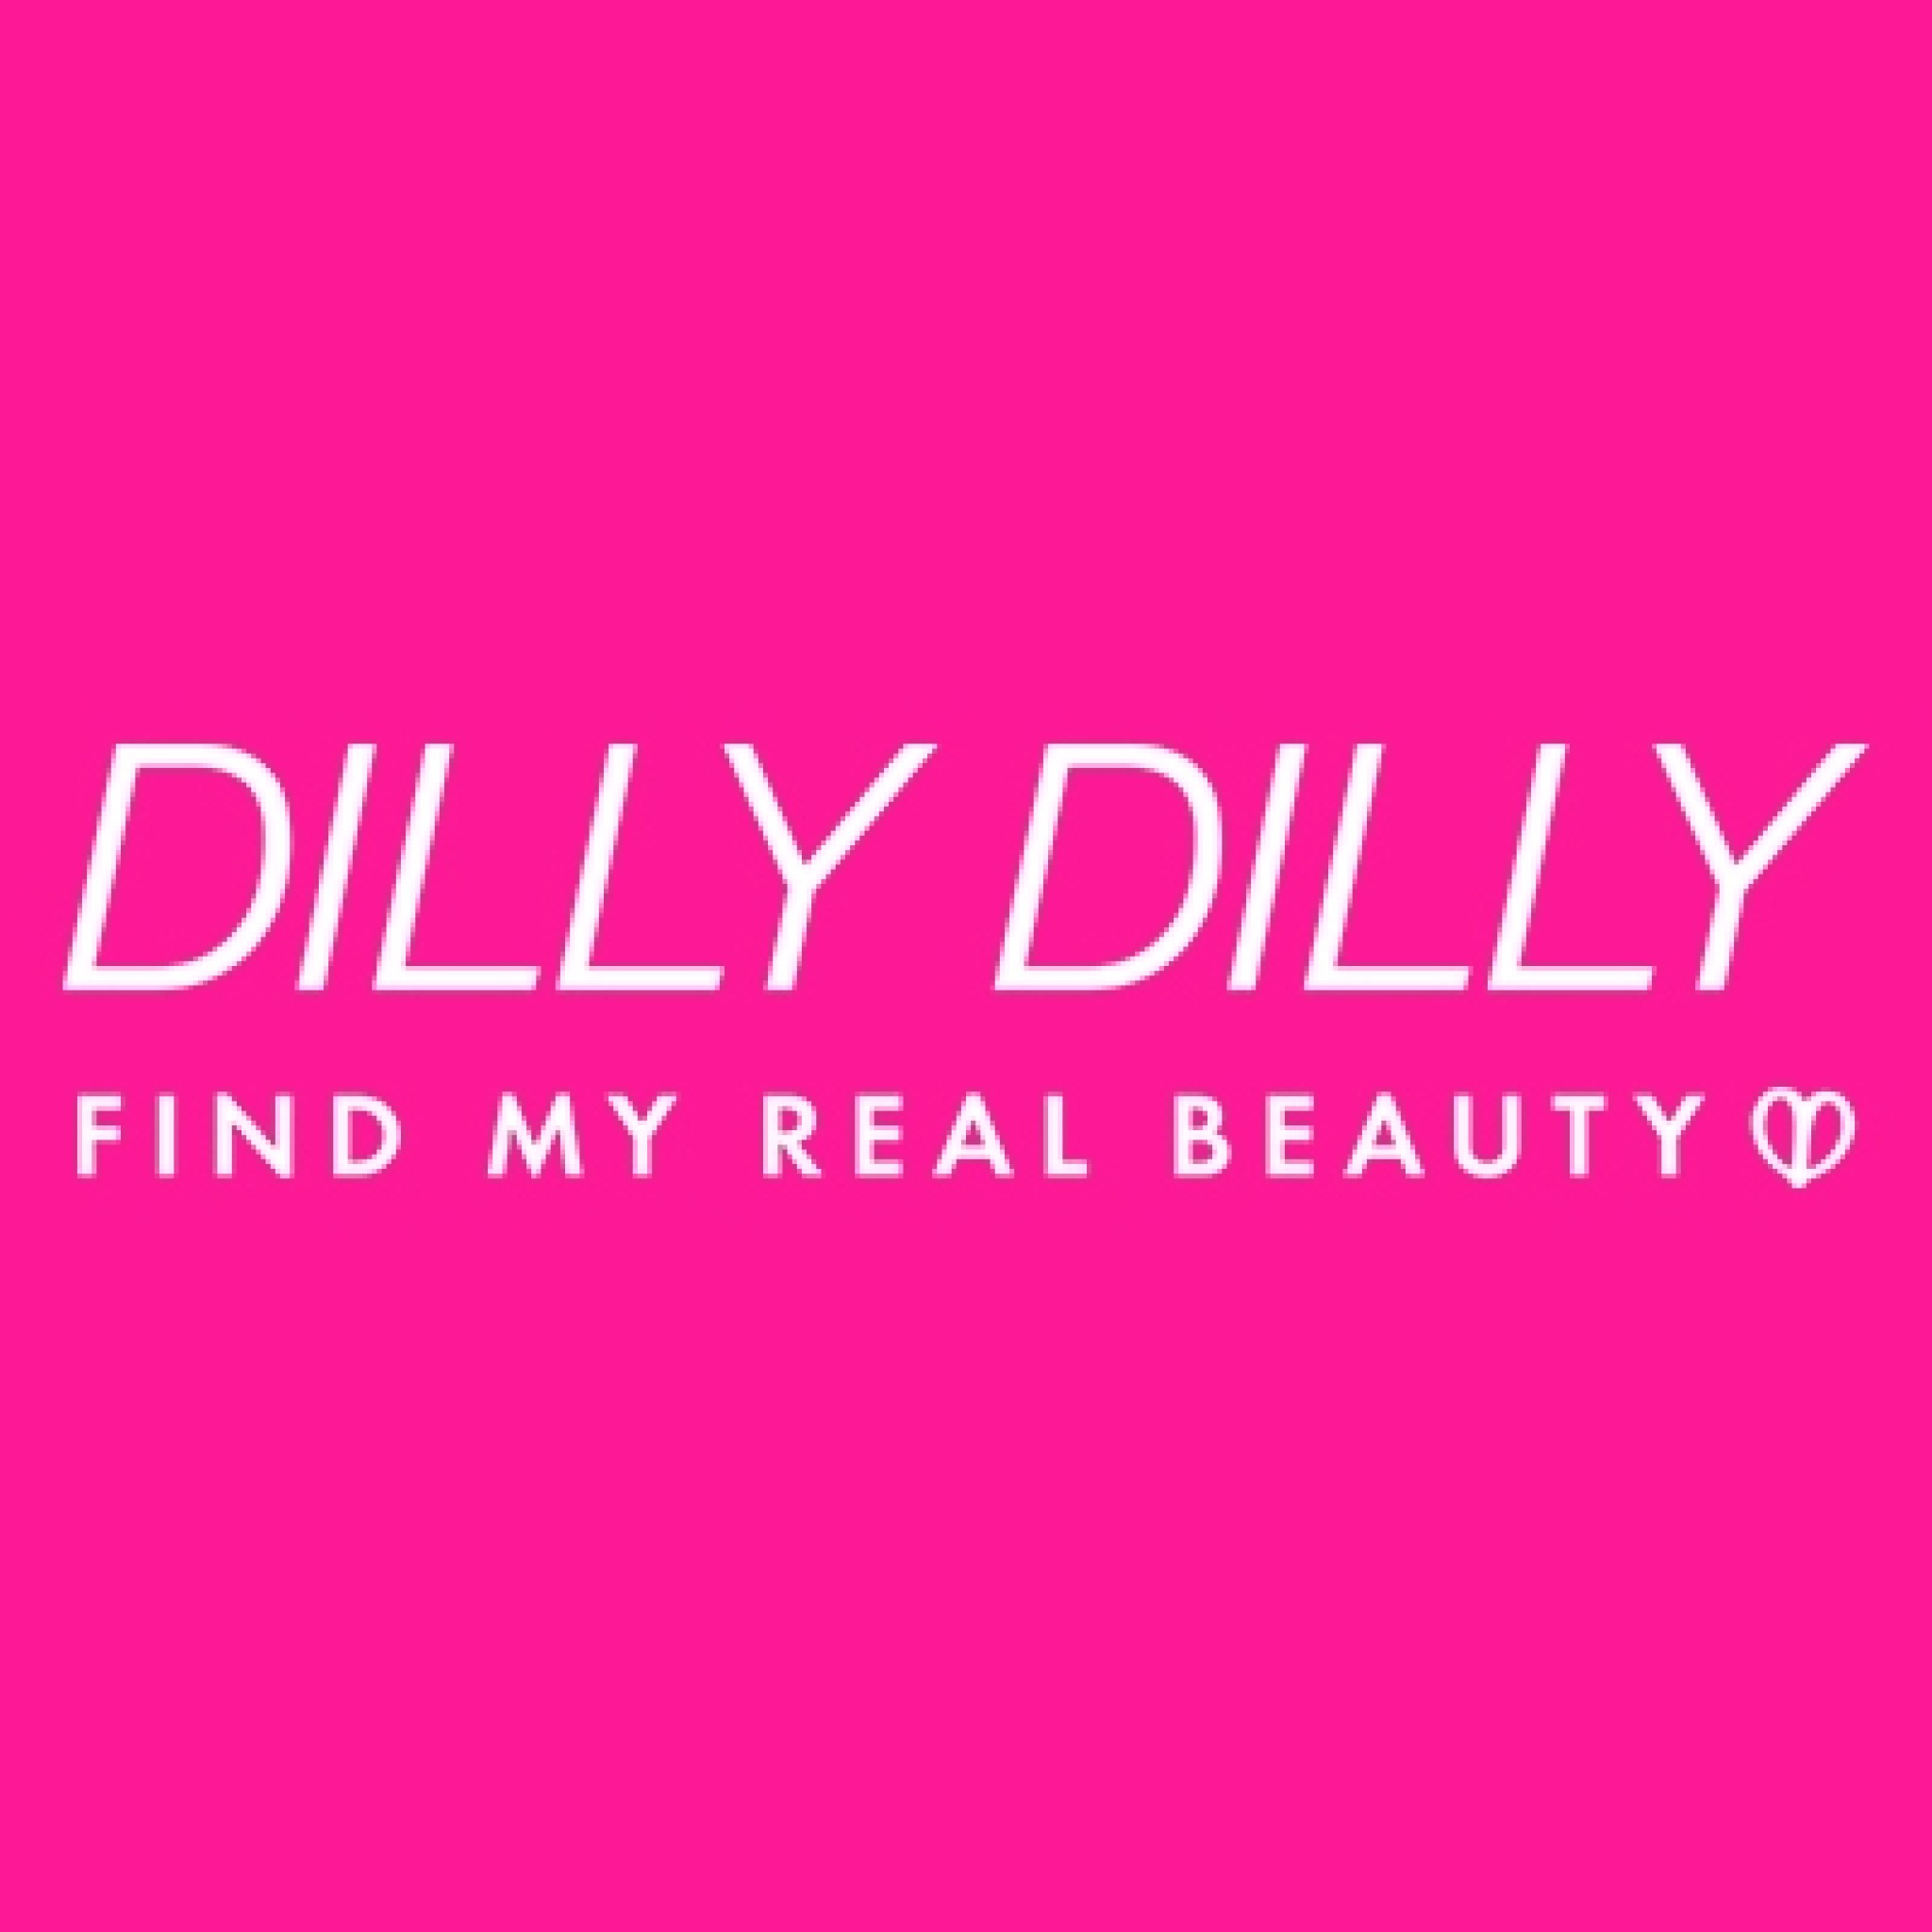 Dilly Dilly Cosmetics